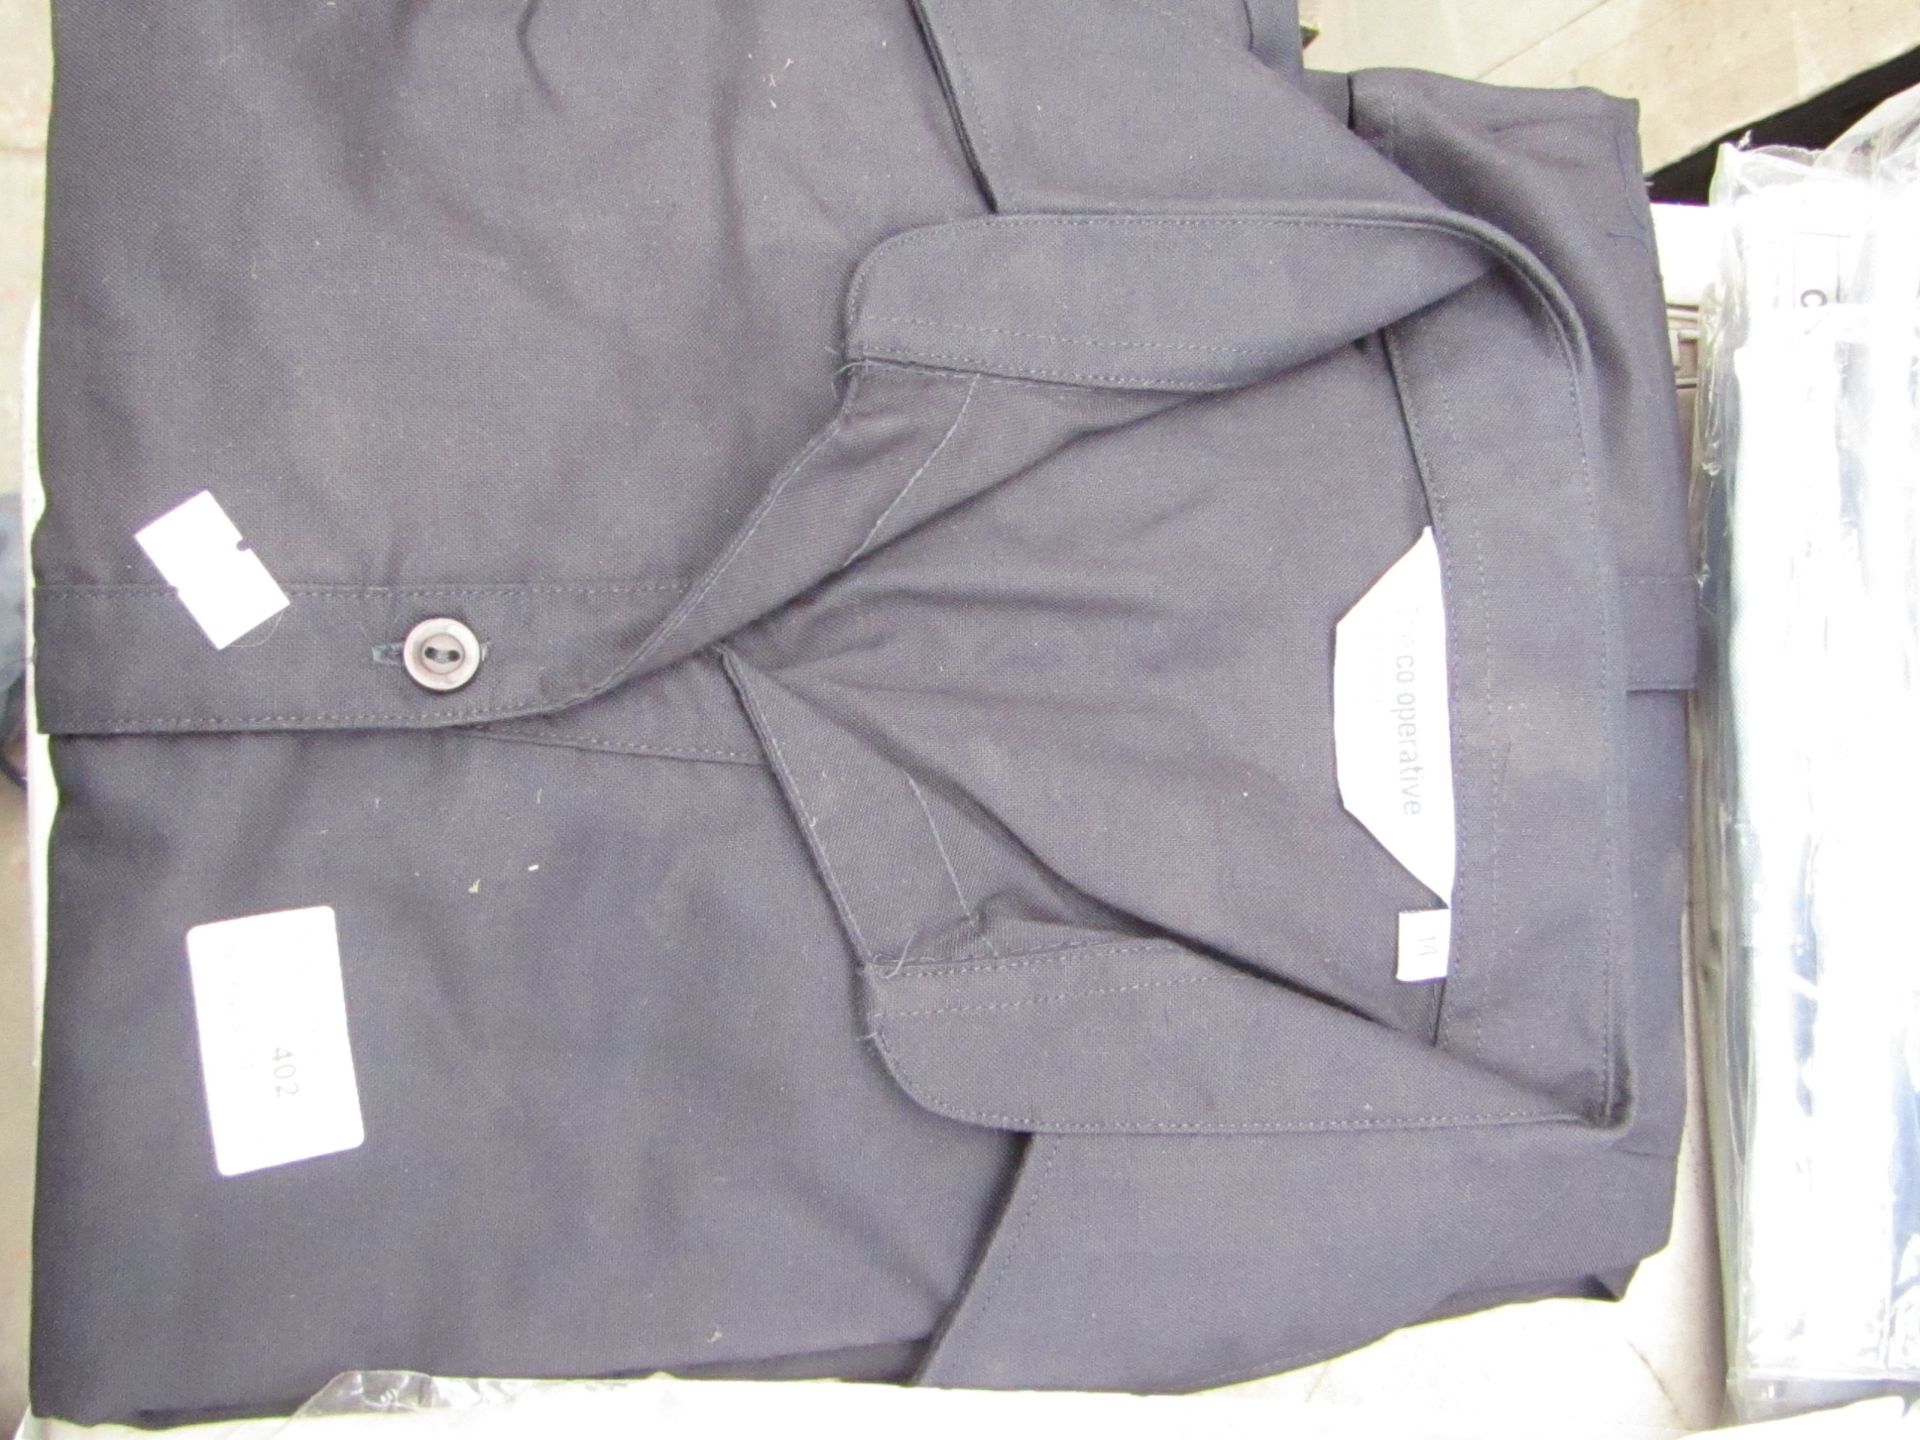 The Co-Operative Clothing shirt, size 14, new and packaged.